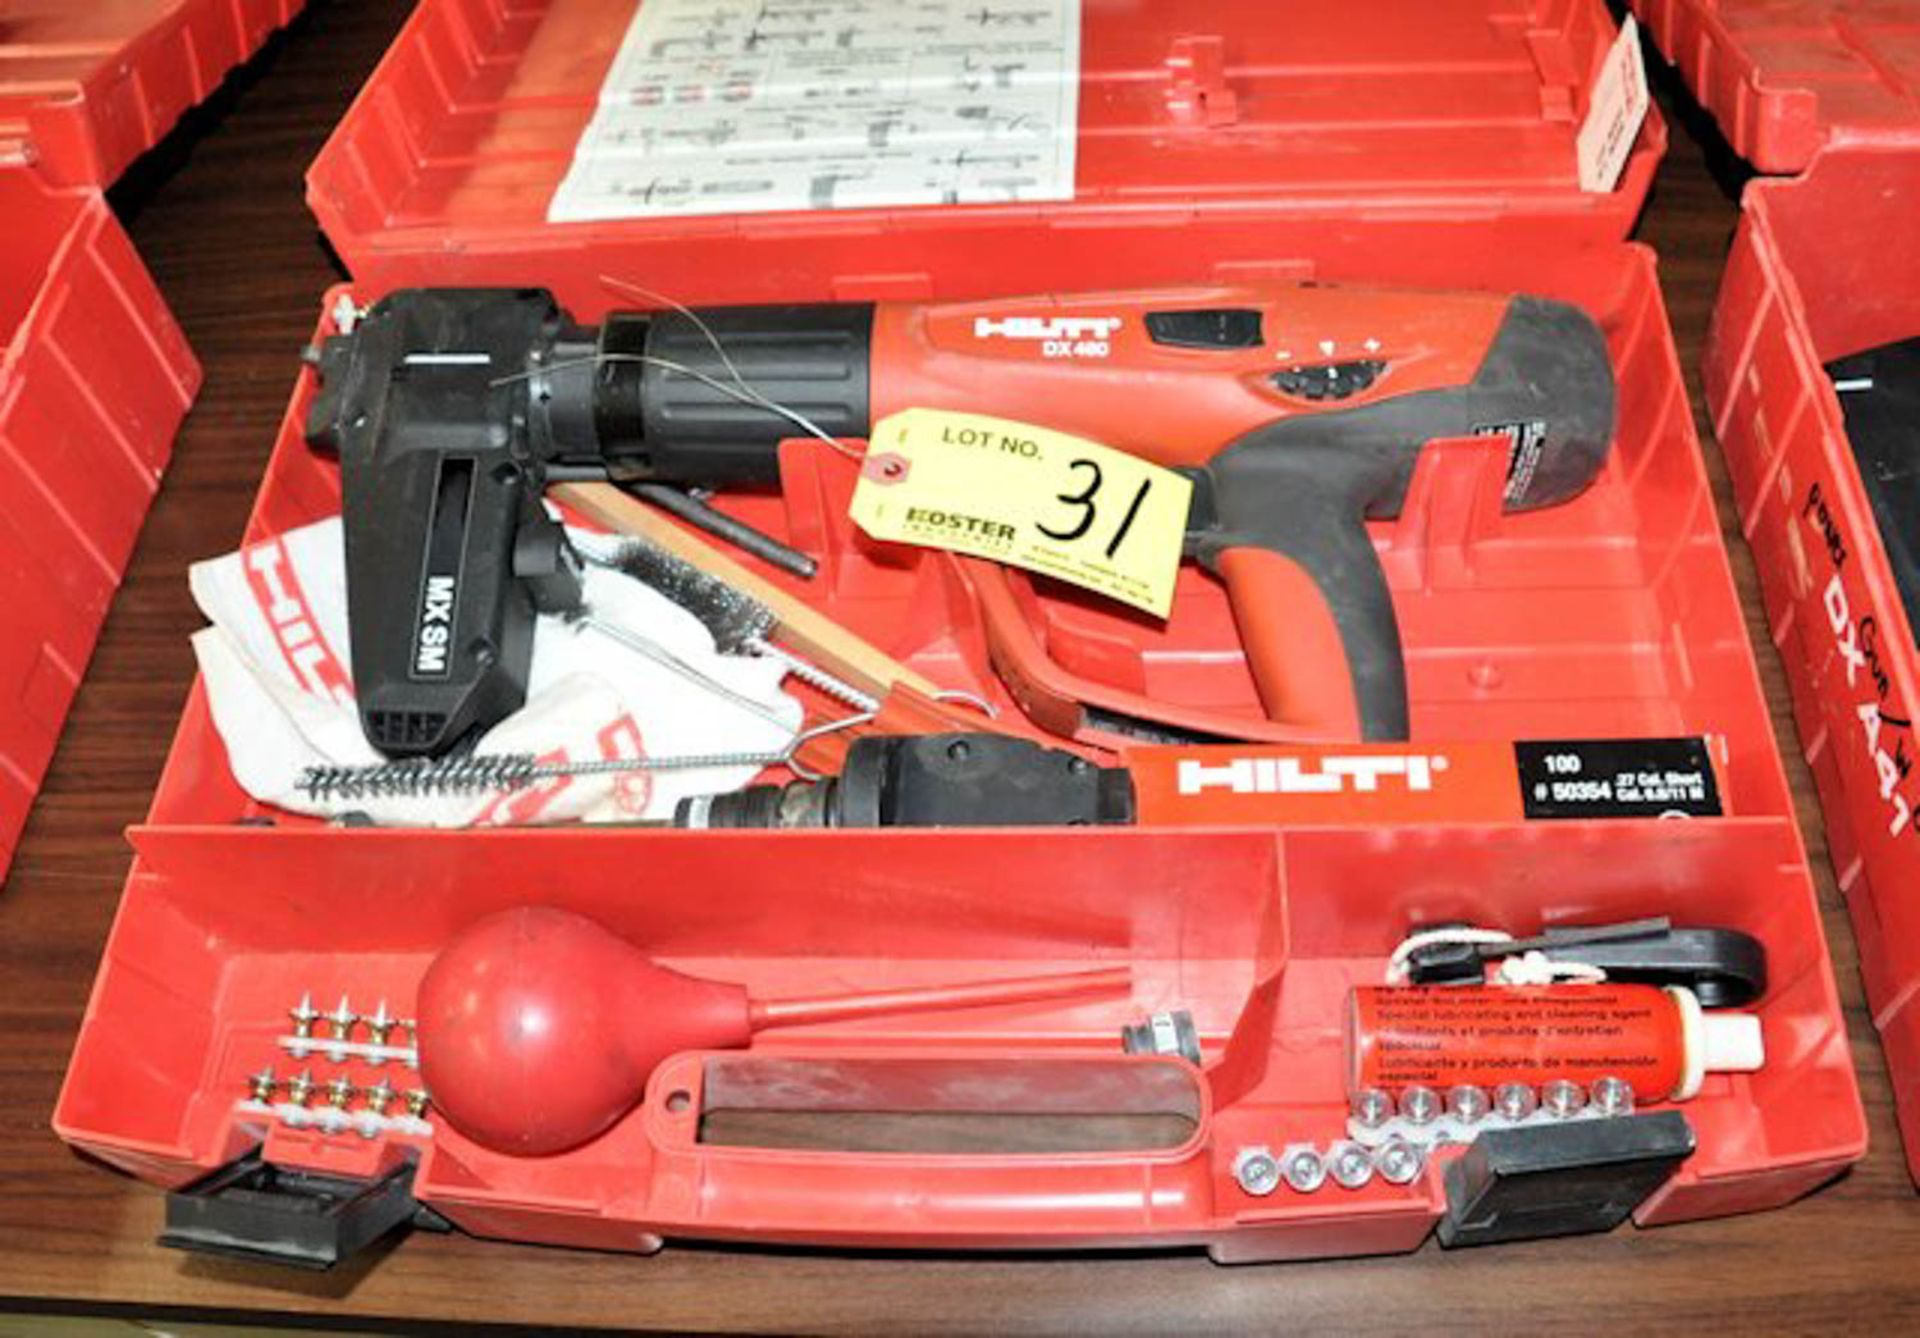 HILTI MODEL DX 460 POWDER ACTUATED NAIL GUN WITH CASE